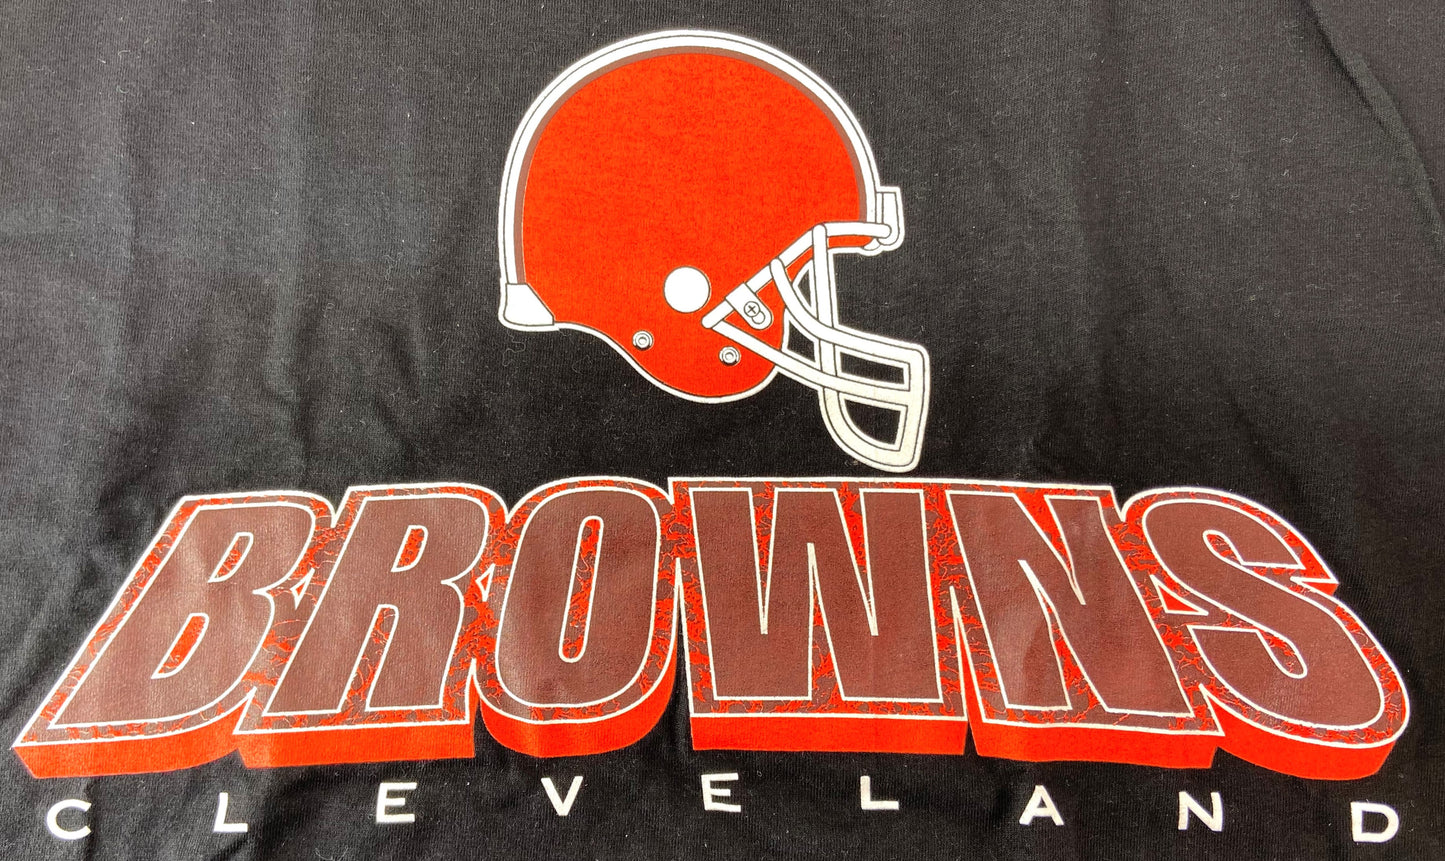 Cleveland Browns Vintage Late '90s NFL Black T-Shirt by True Fan